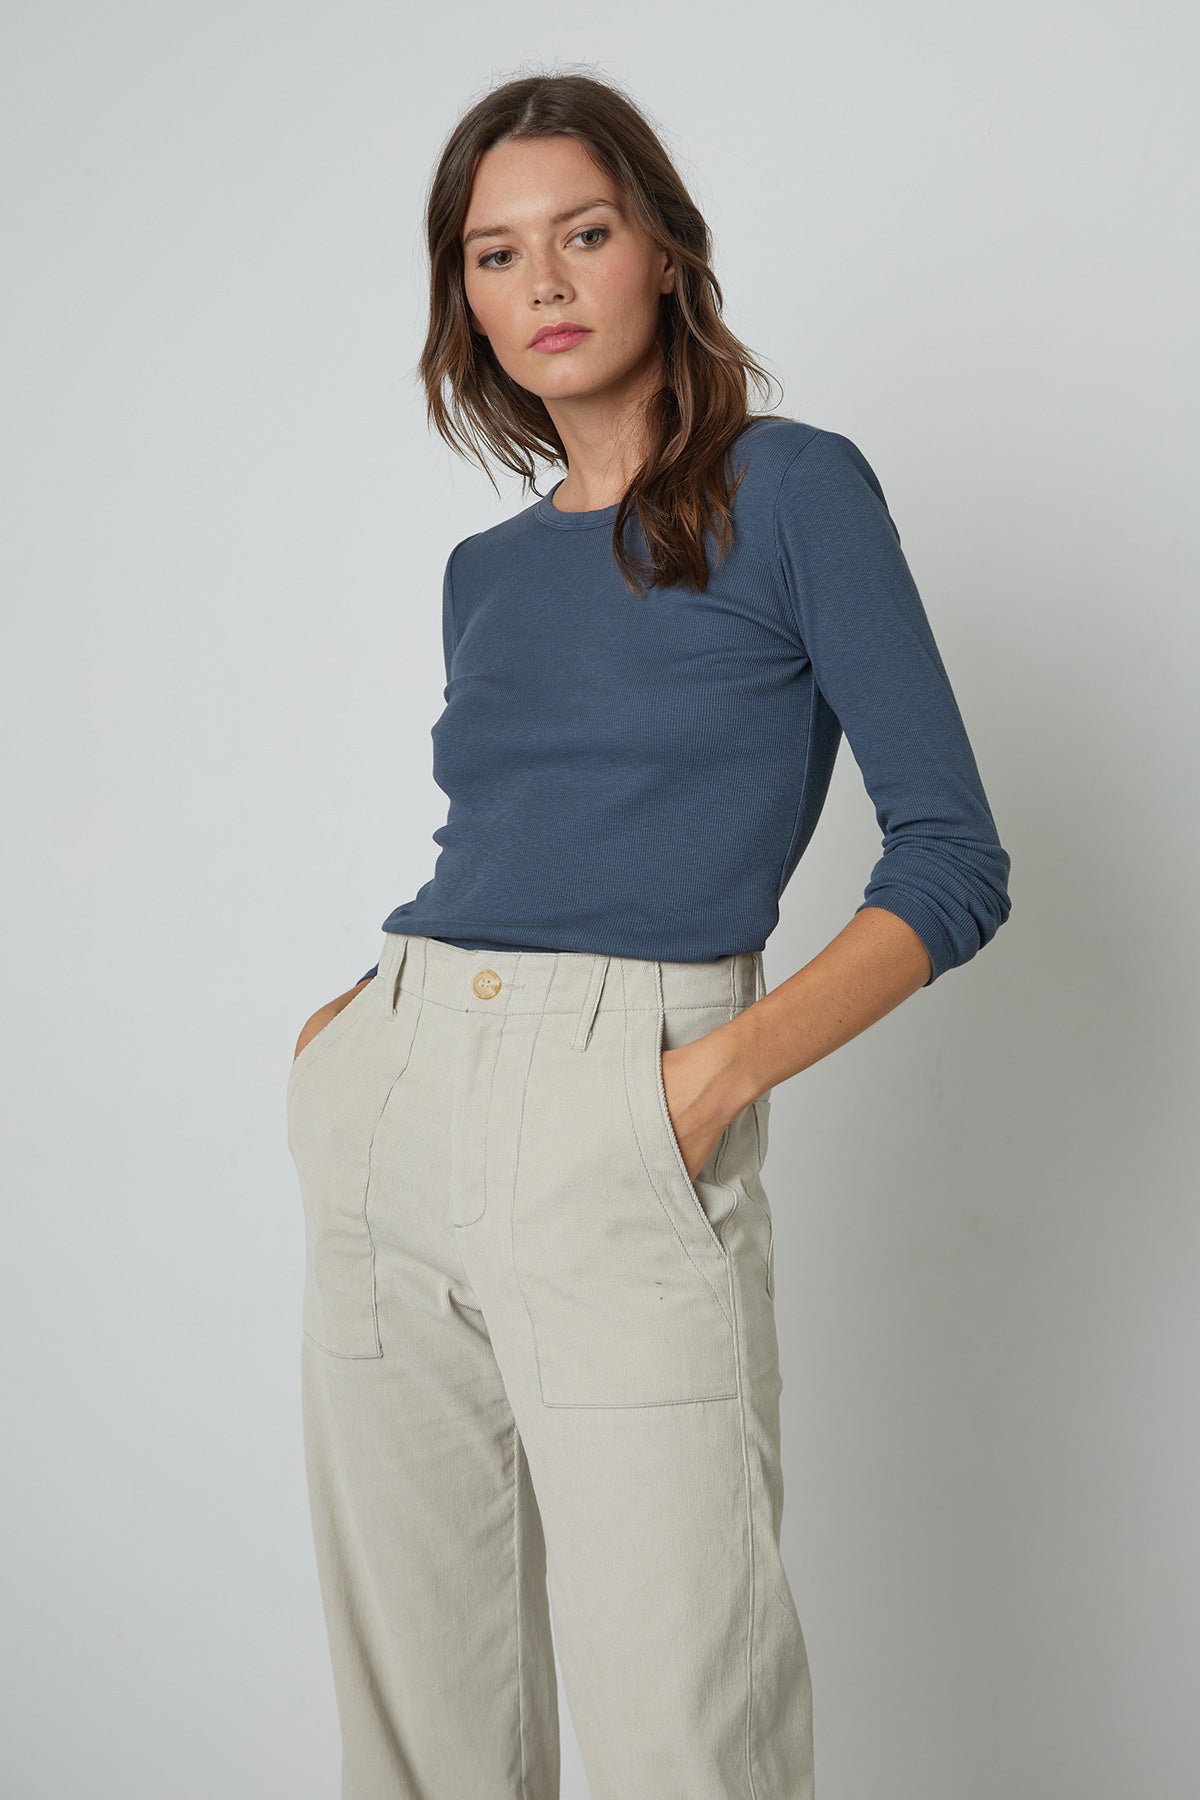 Bayler Tee Shadow tucked into Vera Pant front view-35206768885953